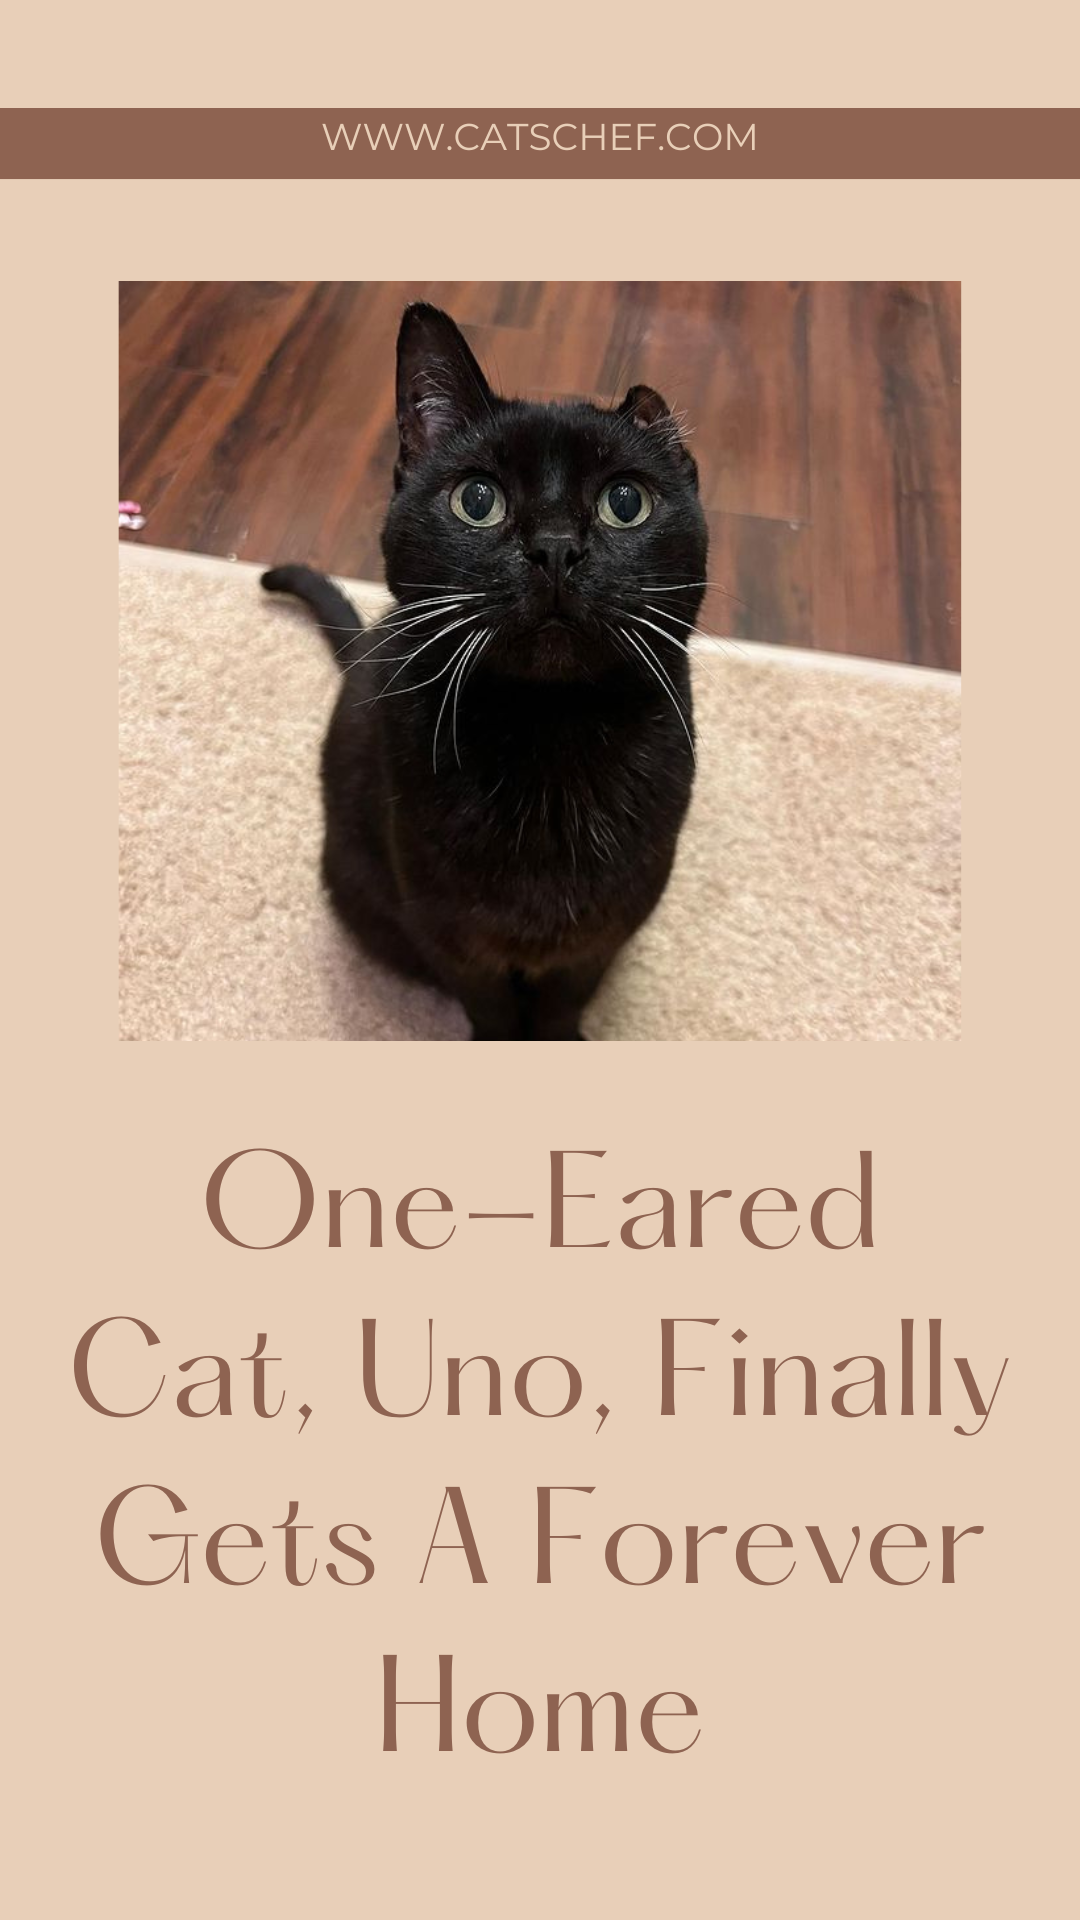 One-Eared Cat, Uno, Finally Gets A Forever Home